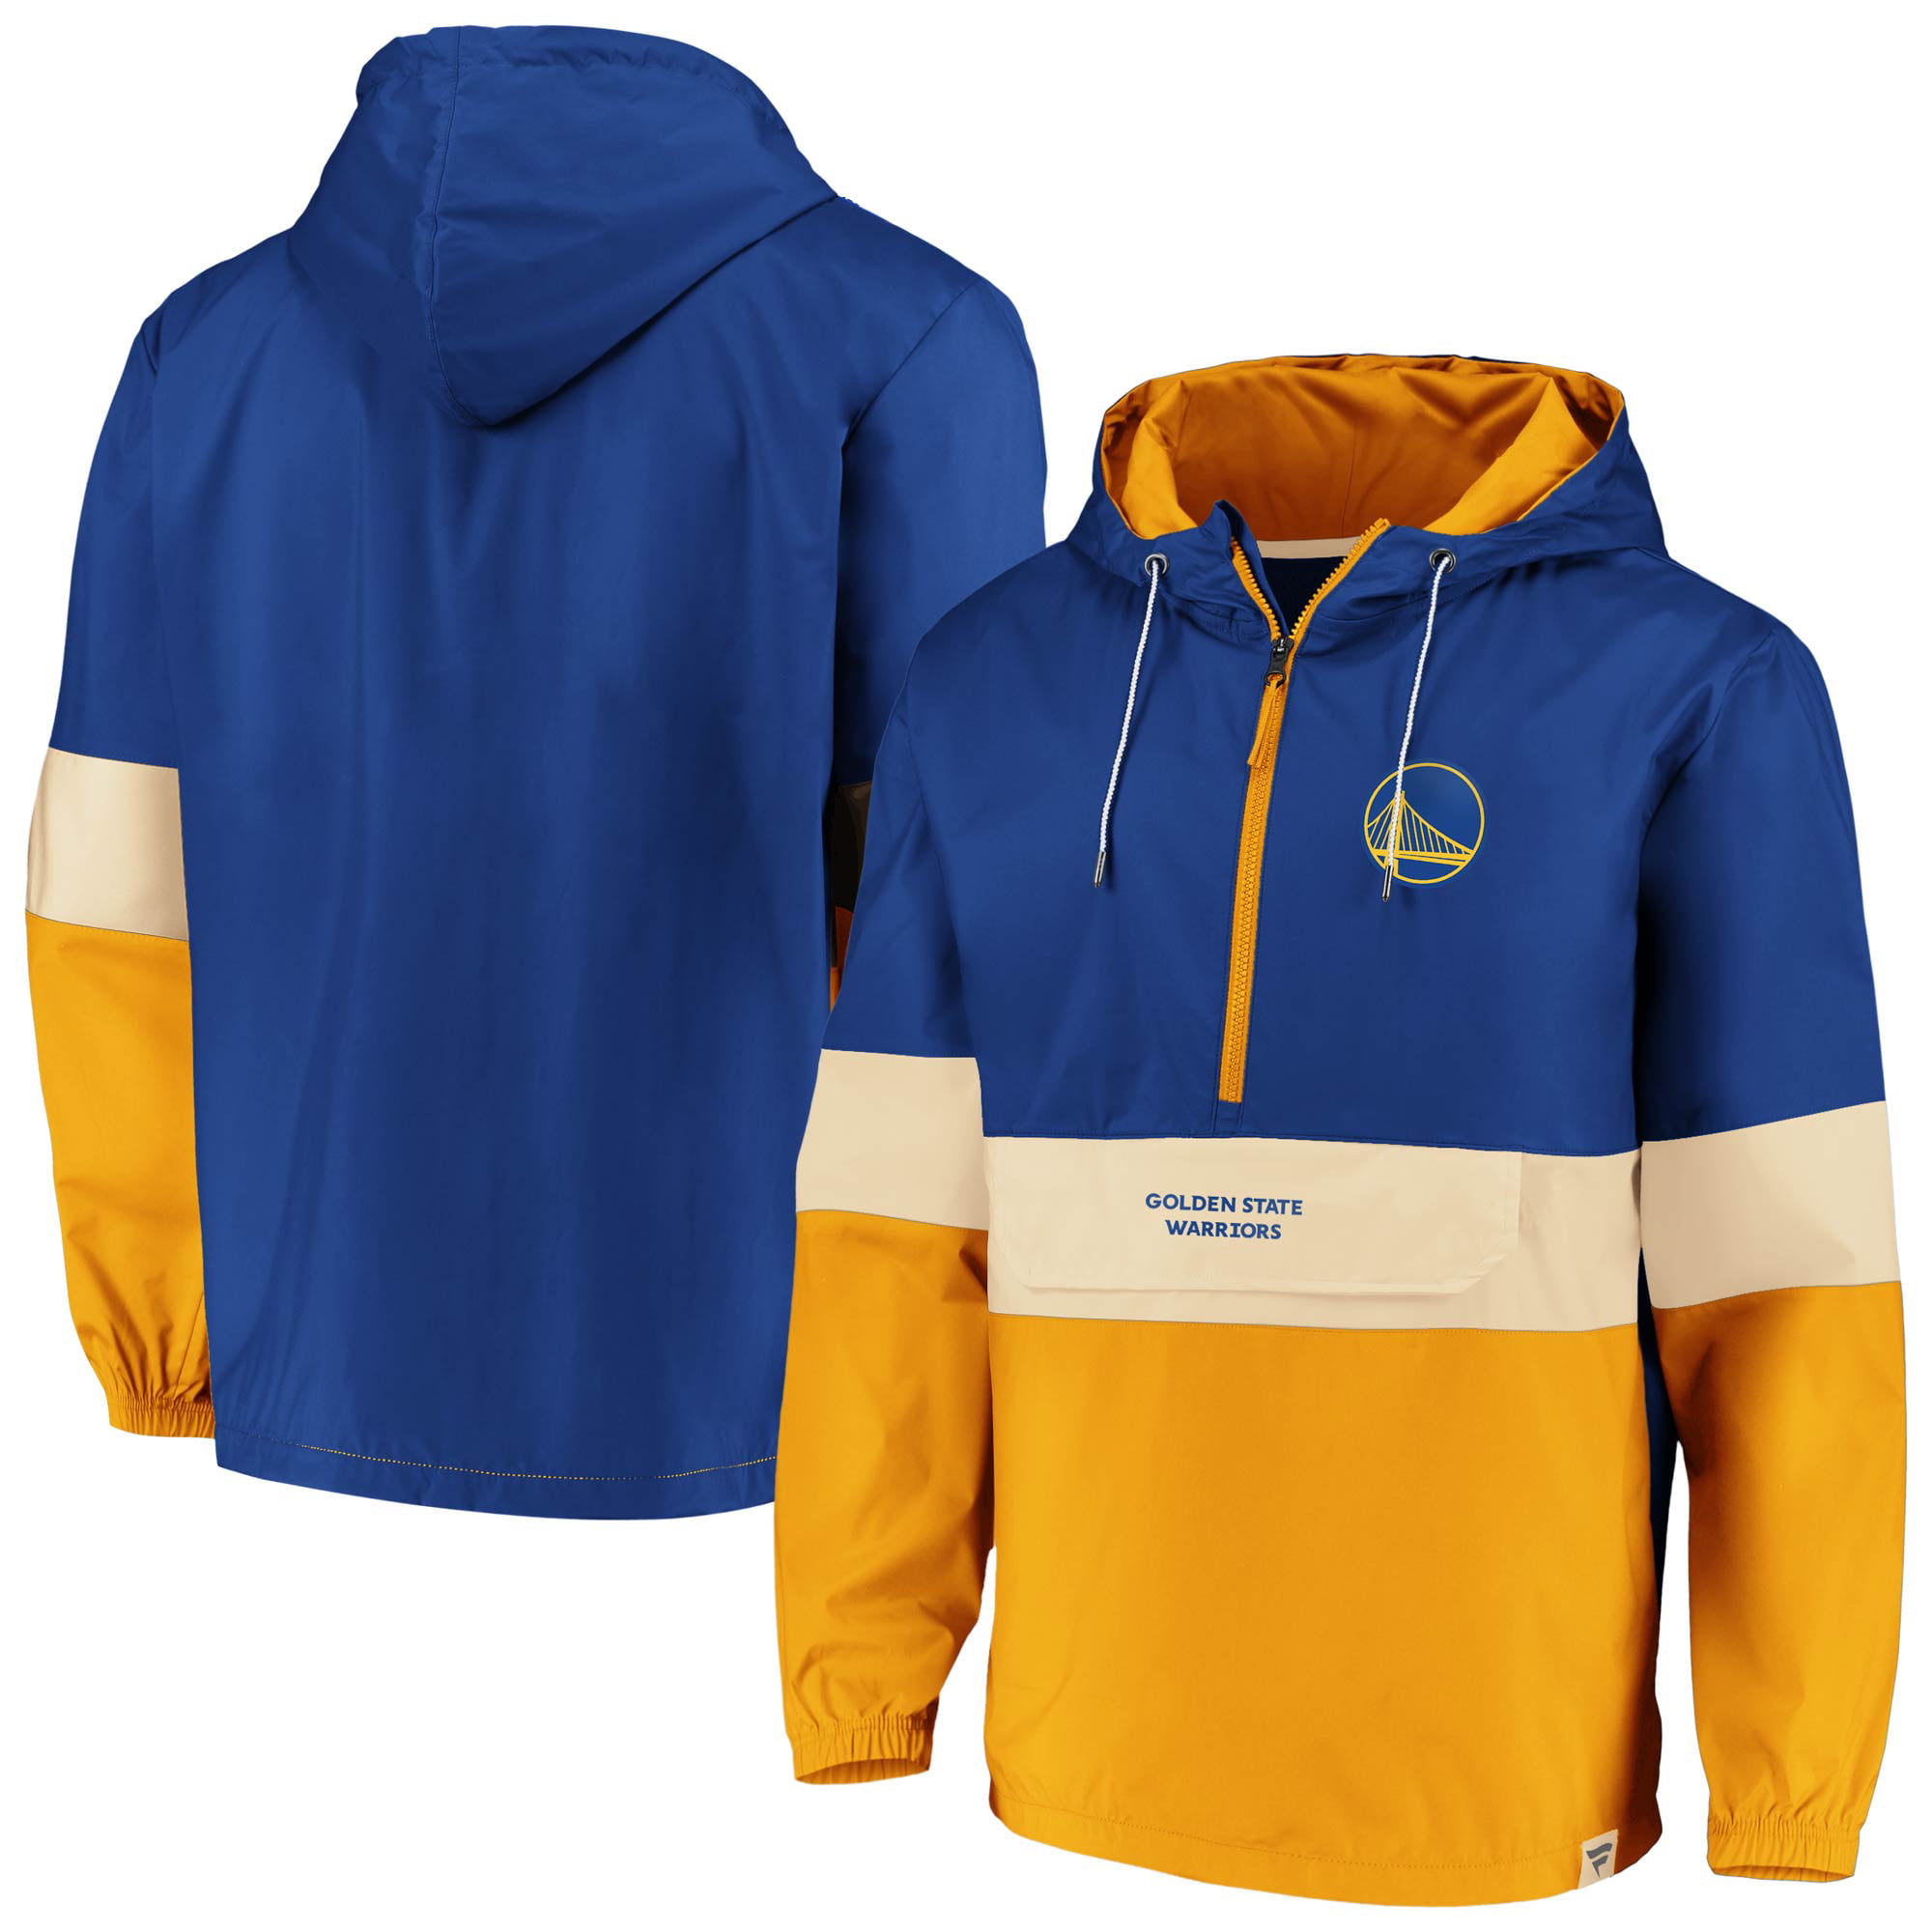 warriors the town jacket